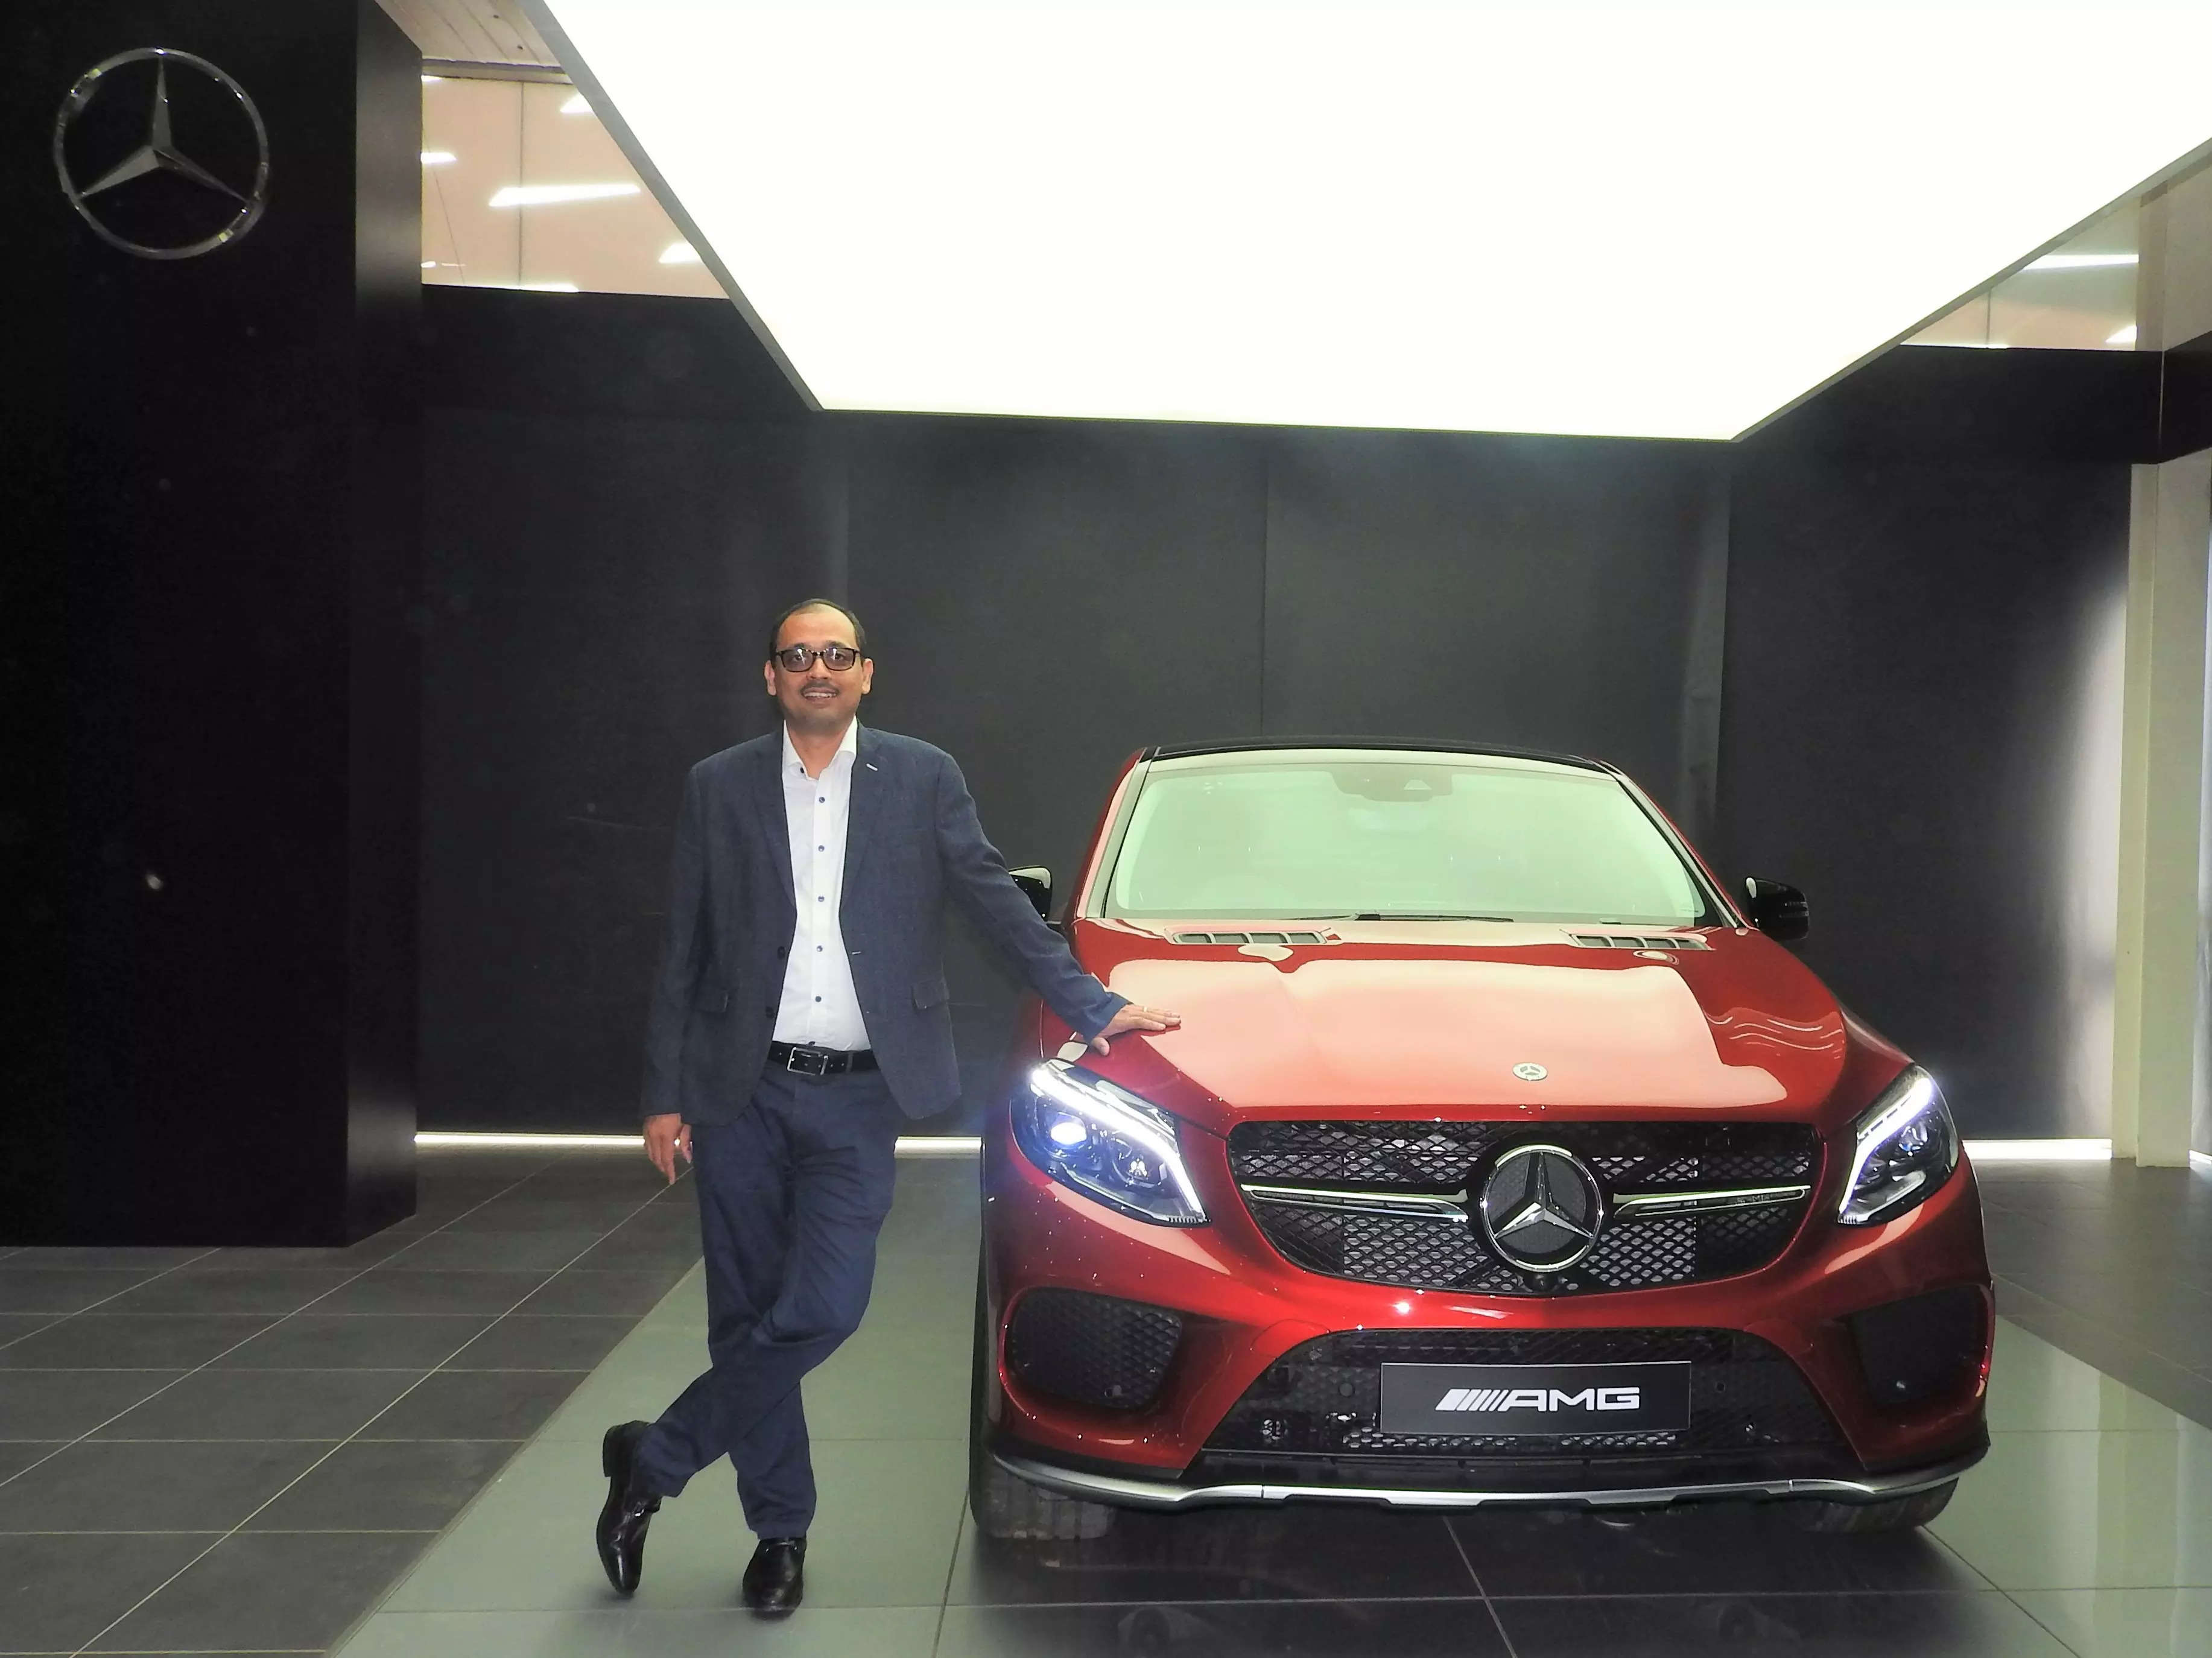  The top seven metros, Delhi, Mumbai, Bengaluru, Chennai, and Hyderabad, are the key markets driving the growth for Mercedes-Benz India, said Santosh Iyer, VP (Sales and Marketing) Mercedes-Benz India,